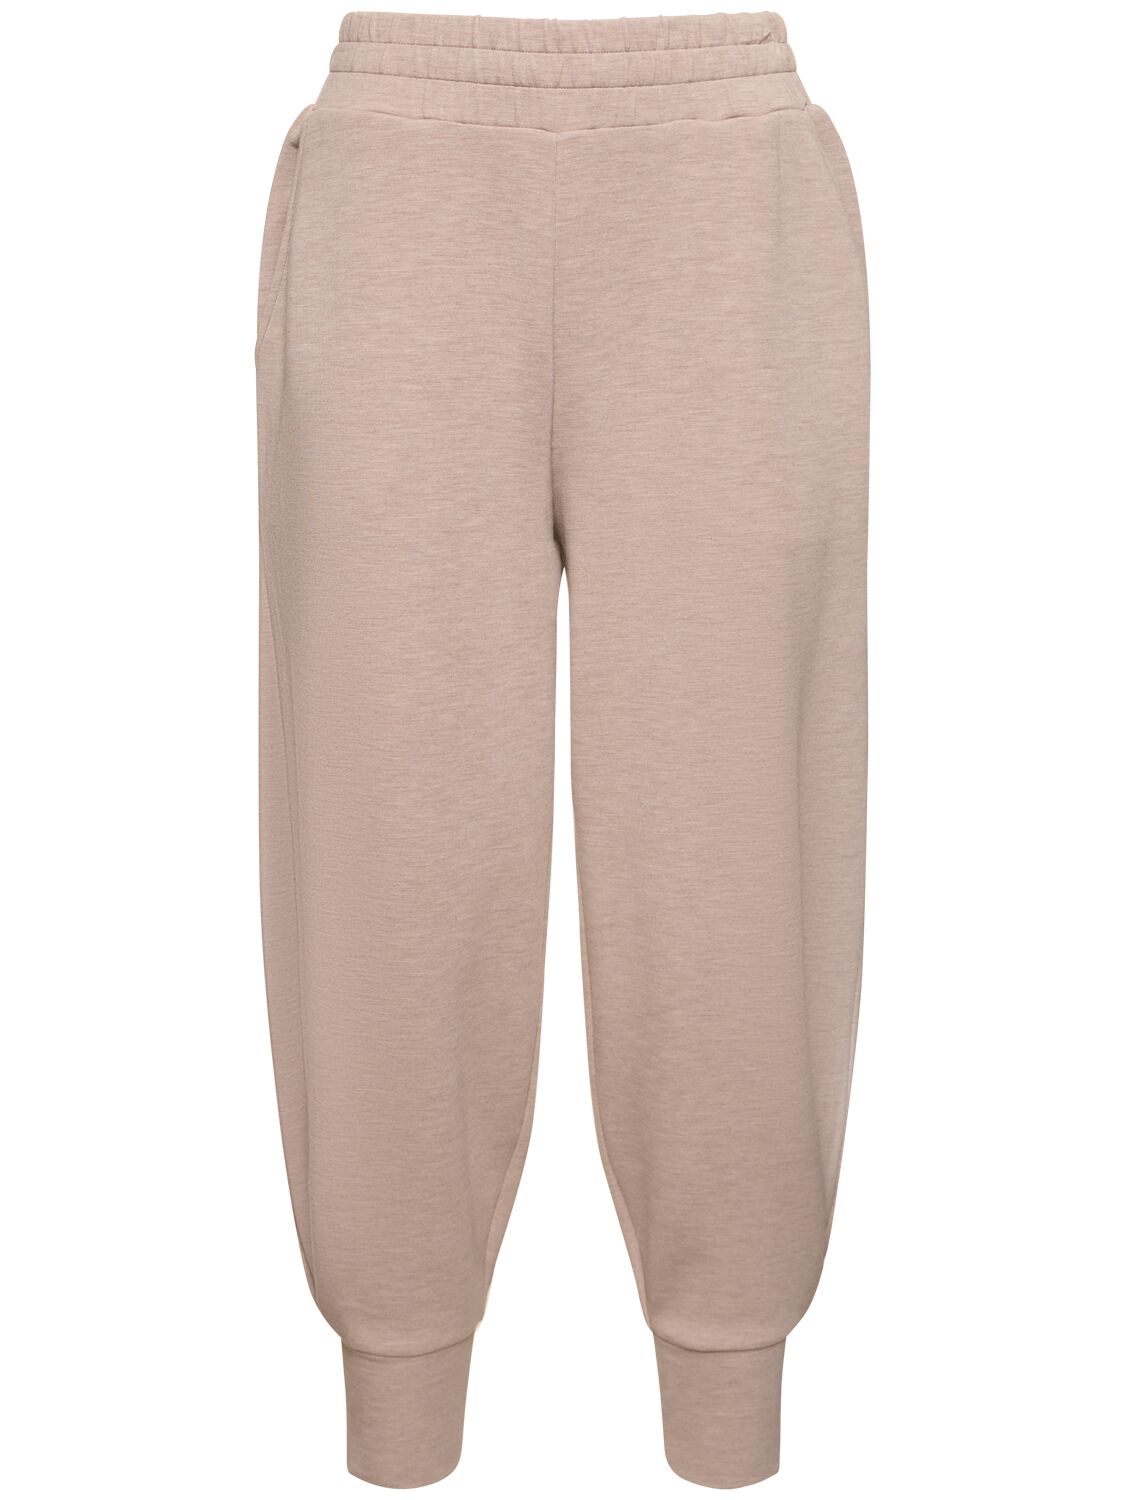 Image of Relaxed Fit High Waist Sweatpants